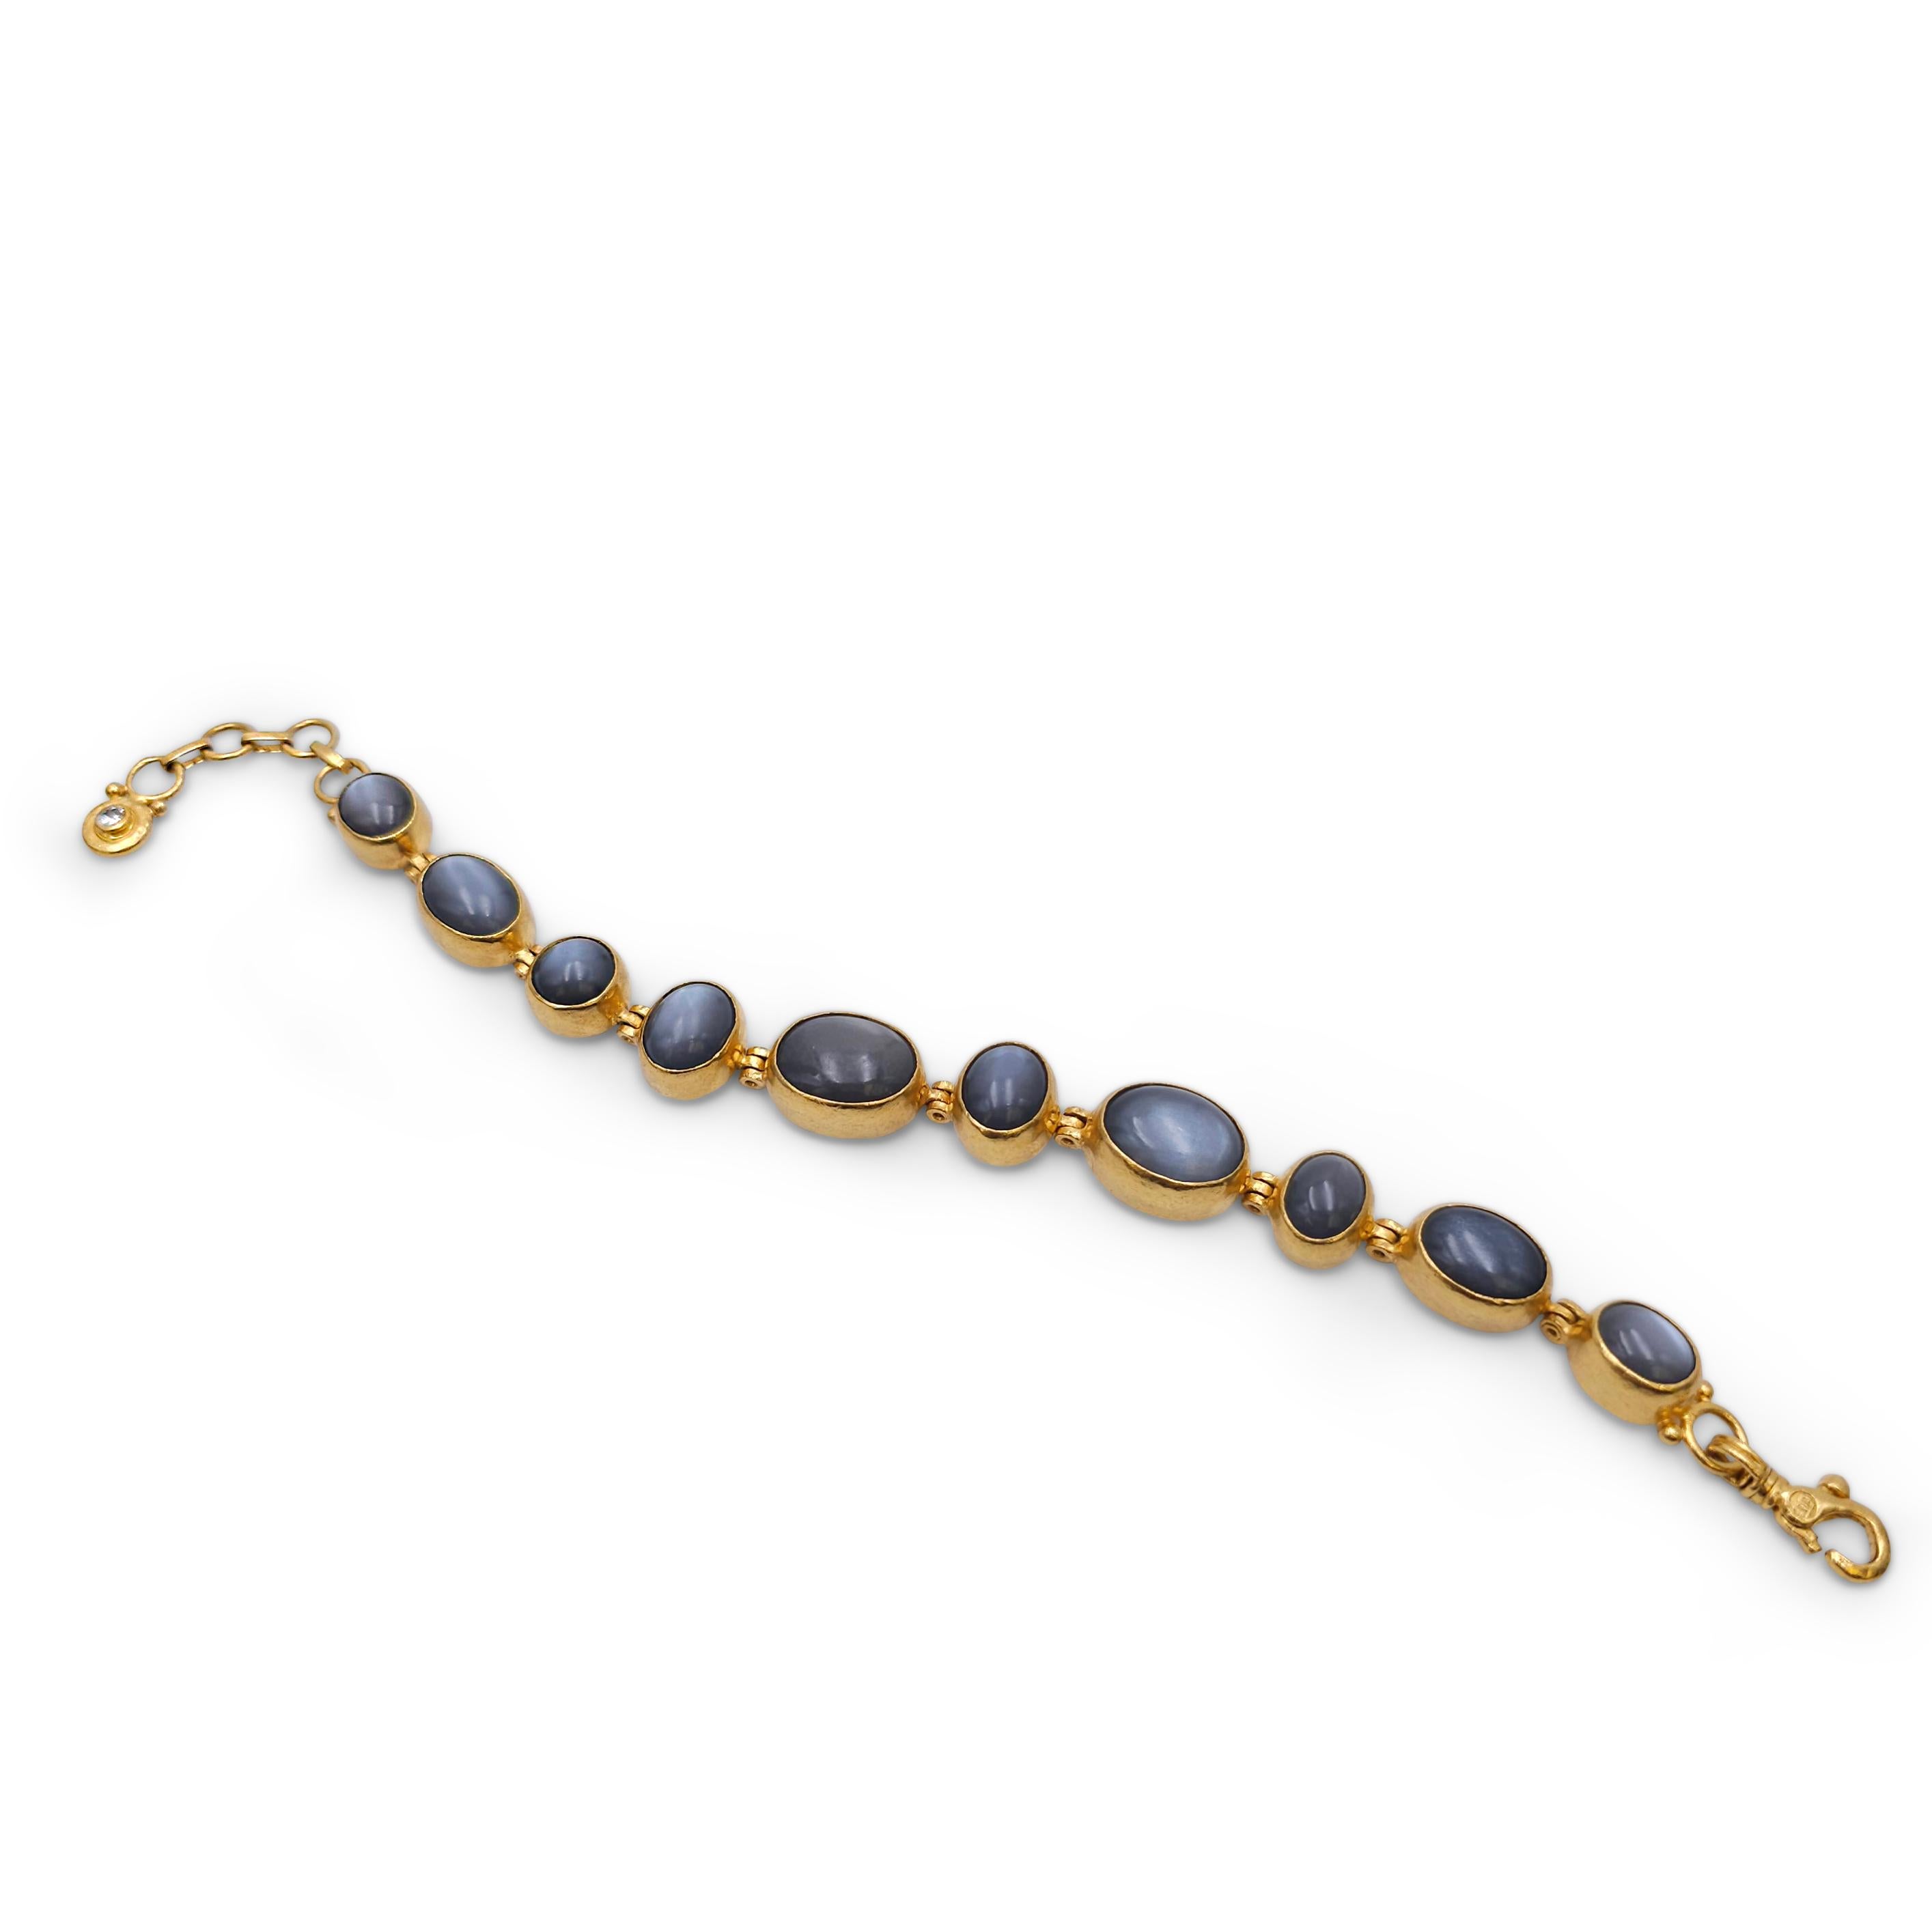 Authentic Gurhan bracelet crafted in 24 karat yellow gold.  Featuring bezel set cabochon black moonstones of varying sizes and bezel set diamonds at each end for an estimated 0.10 carats total diamond weight.   The bracelet measures 8 1/4 inches in